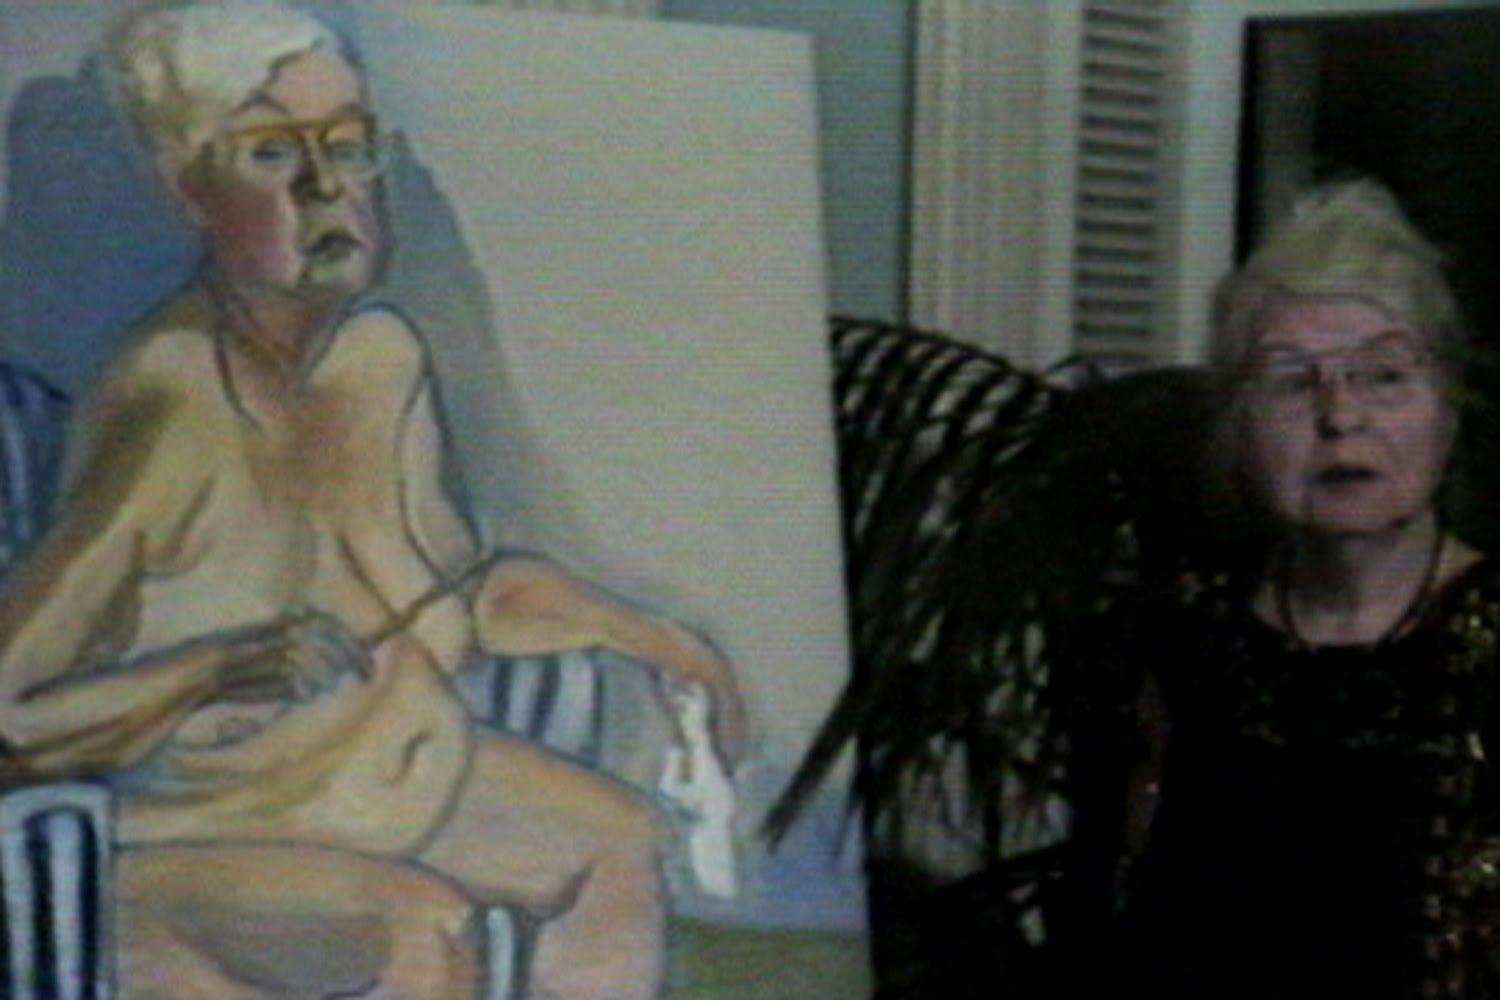 A still from the film A Portrait of a Painter by Michel Auder, dated 2007.